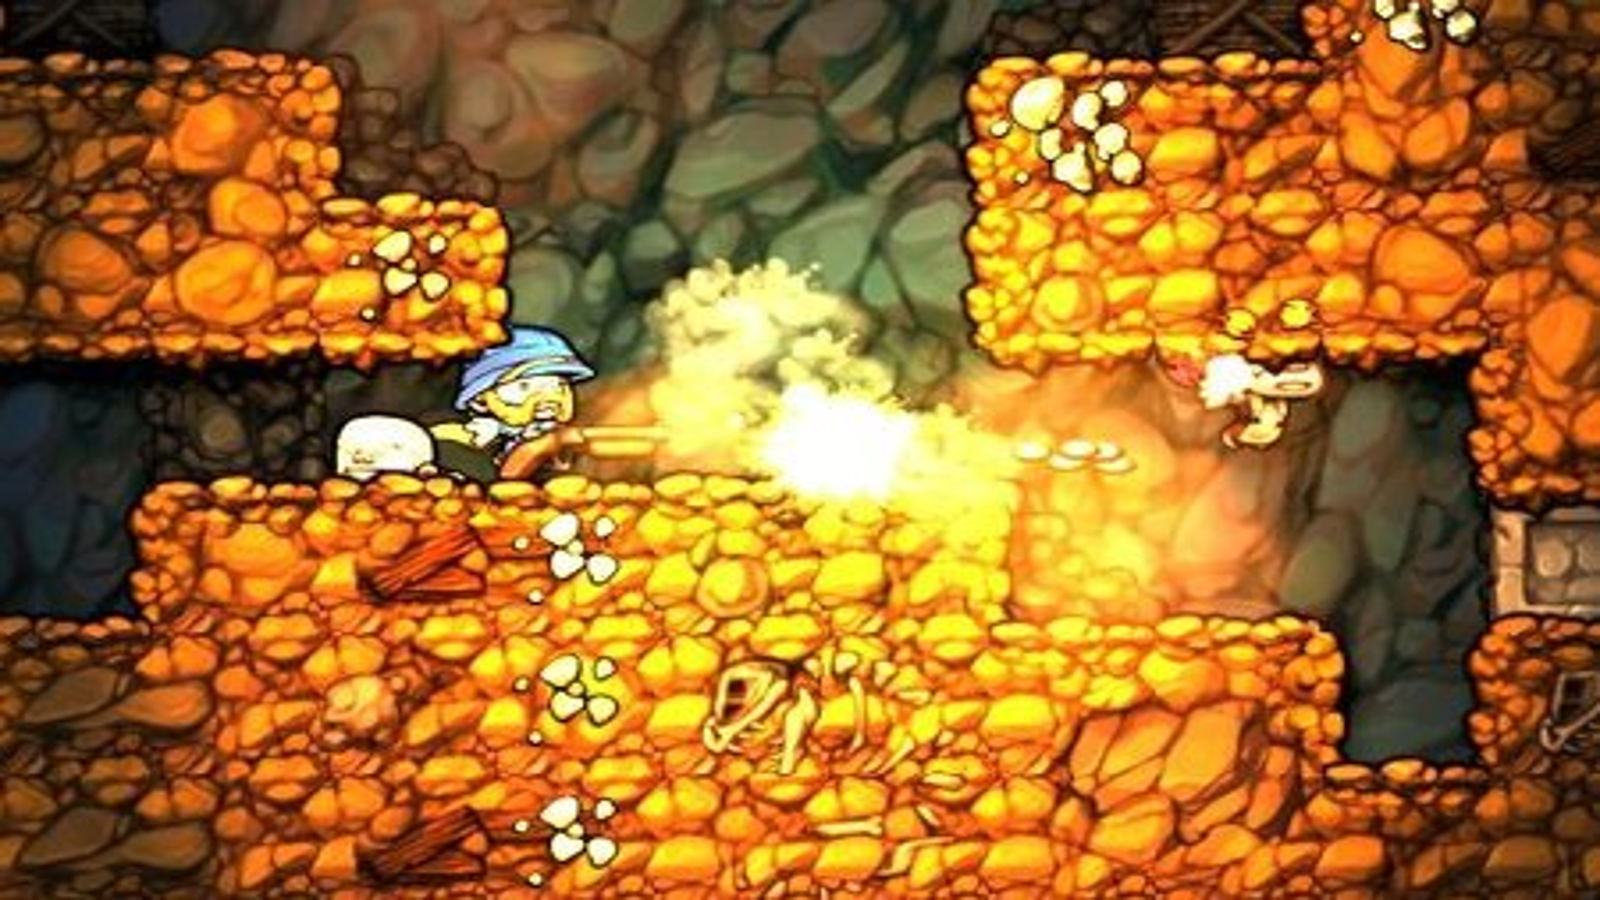 Spelunky Official Trailer 